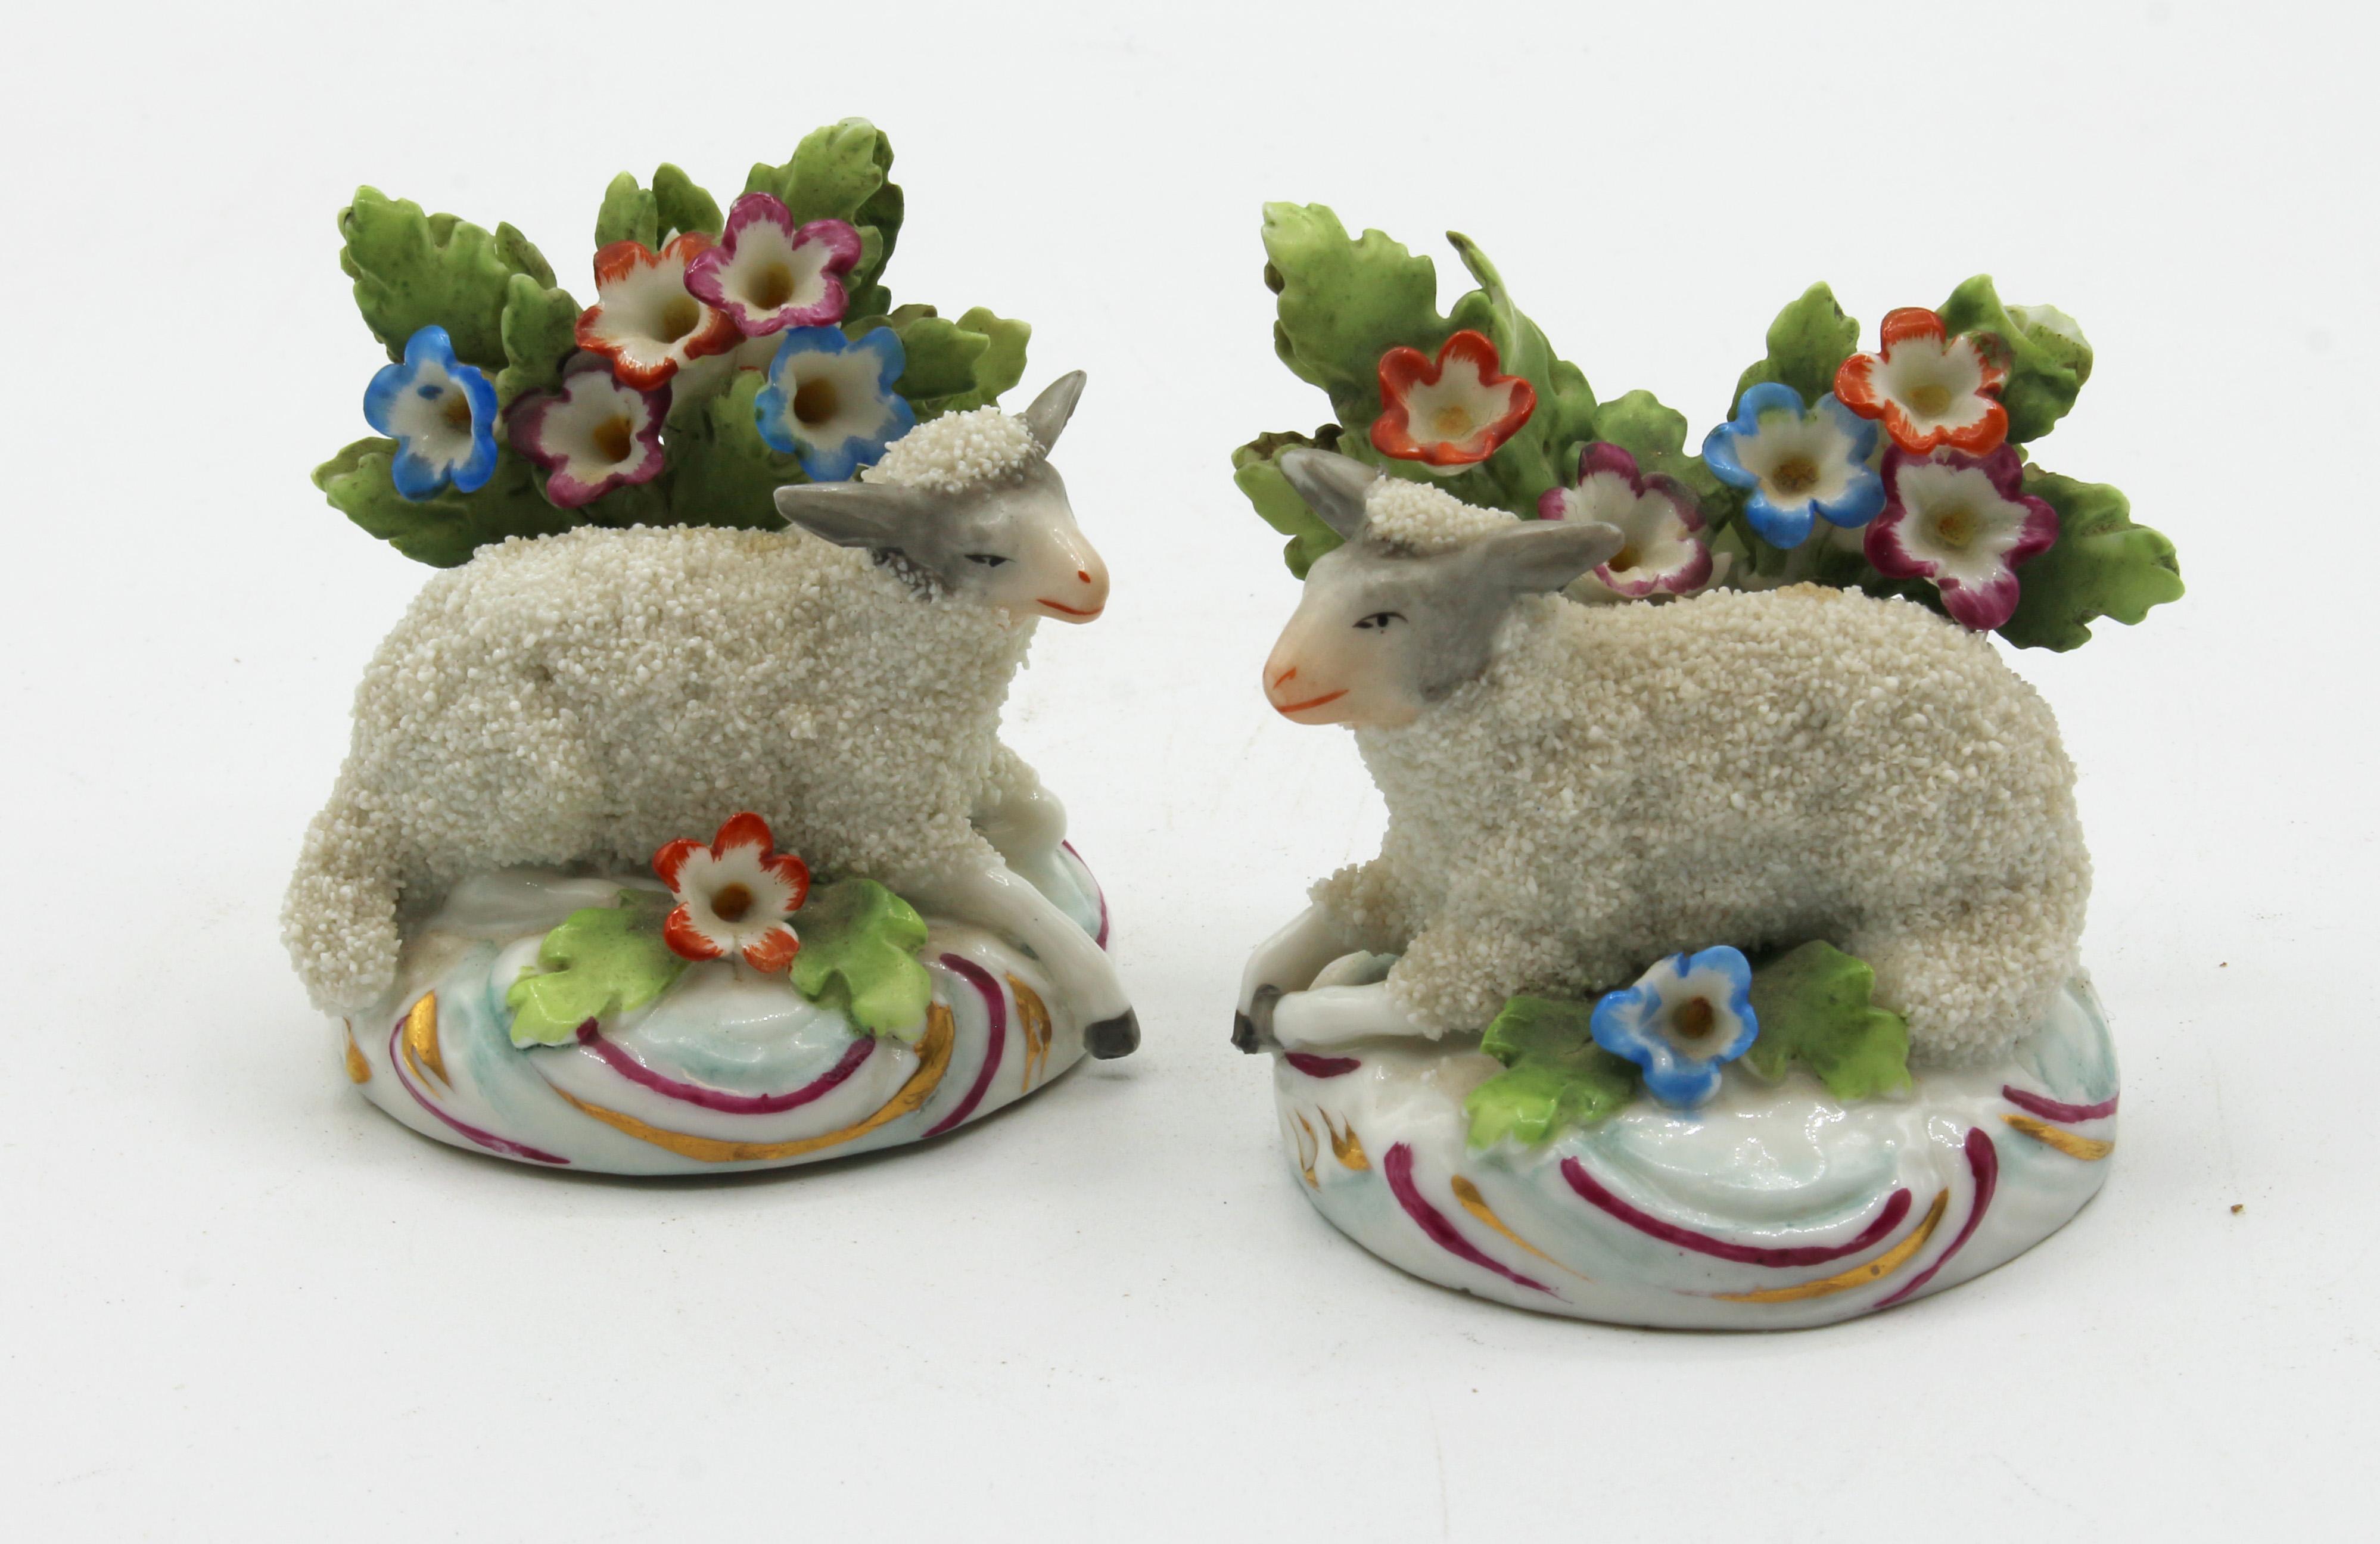 Pair of recumbent sheep with bocages. By Samson, one with fake Chelsea gold anchor mark. c.1900, Paris. Hard paste porcelain. Made to fool the Grand Tour buyer. These retain a dealer label as Chelsea, c.1770! Minor losses. 2 1/2